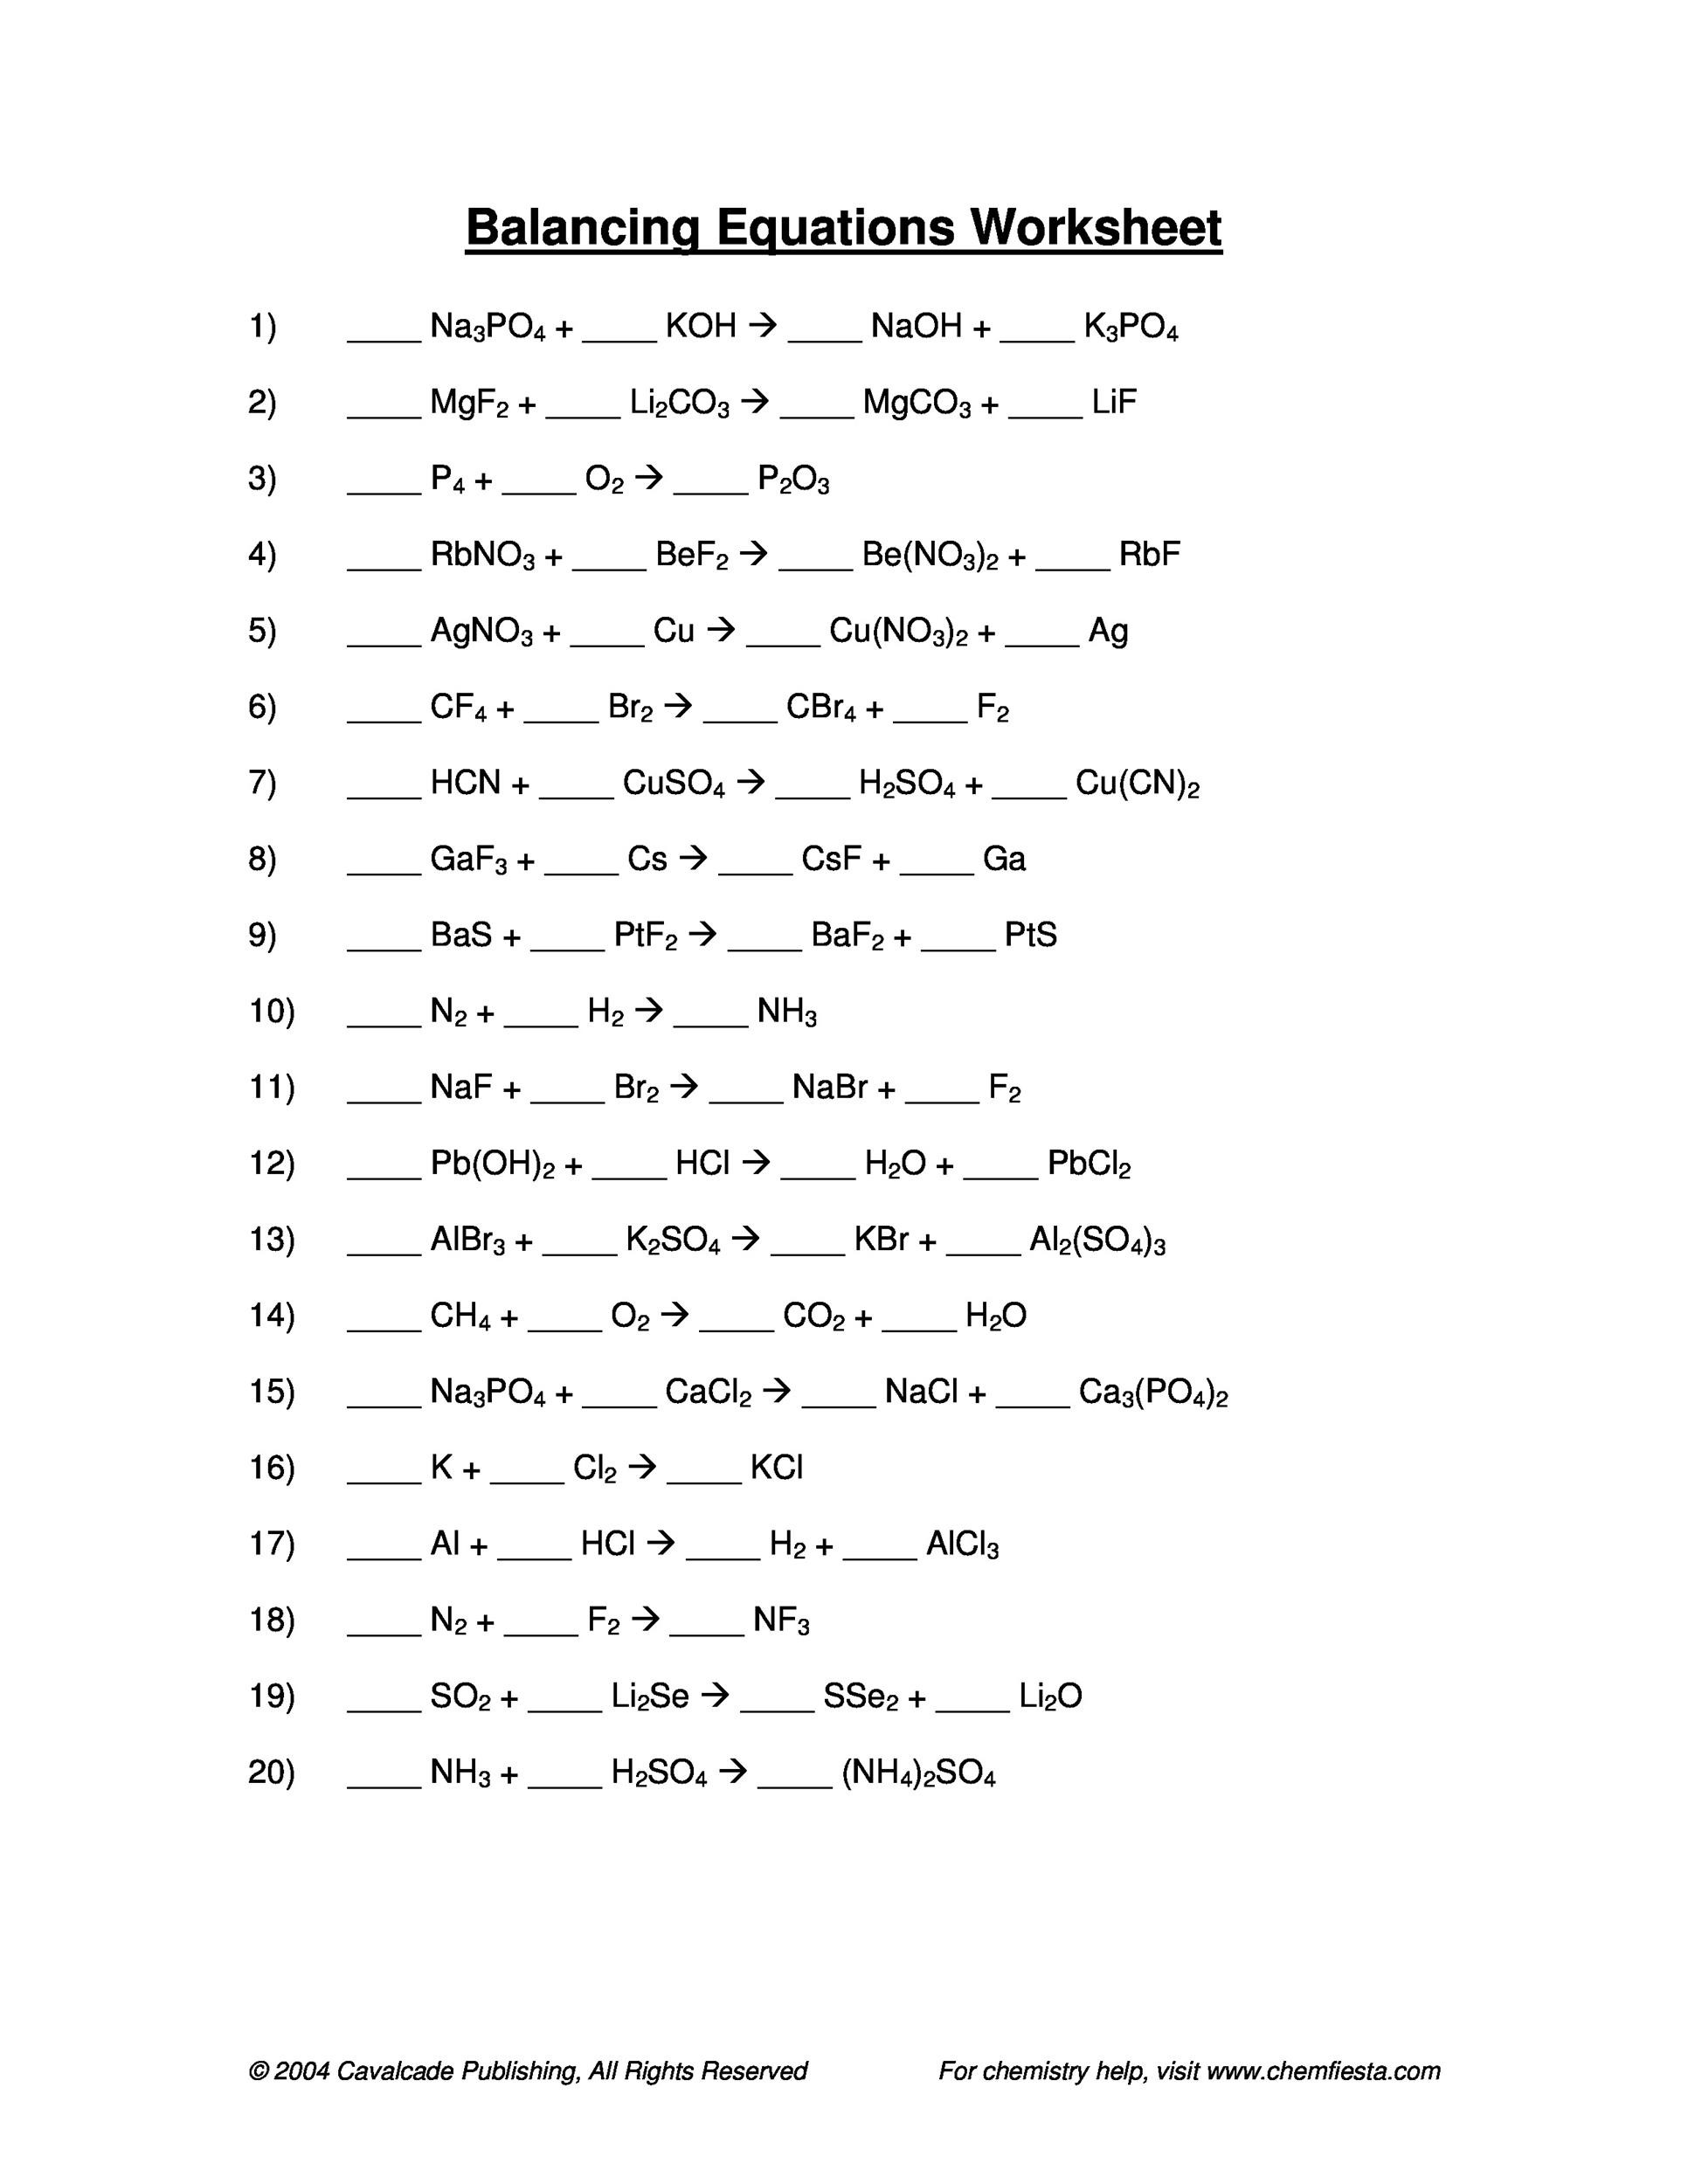 Chemical Reactions Types Worksheet 49 Balancing Chemical Equations Worksheets [with Answers]